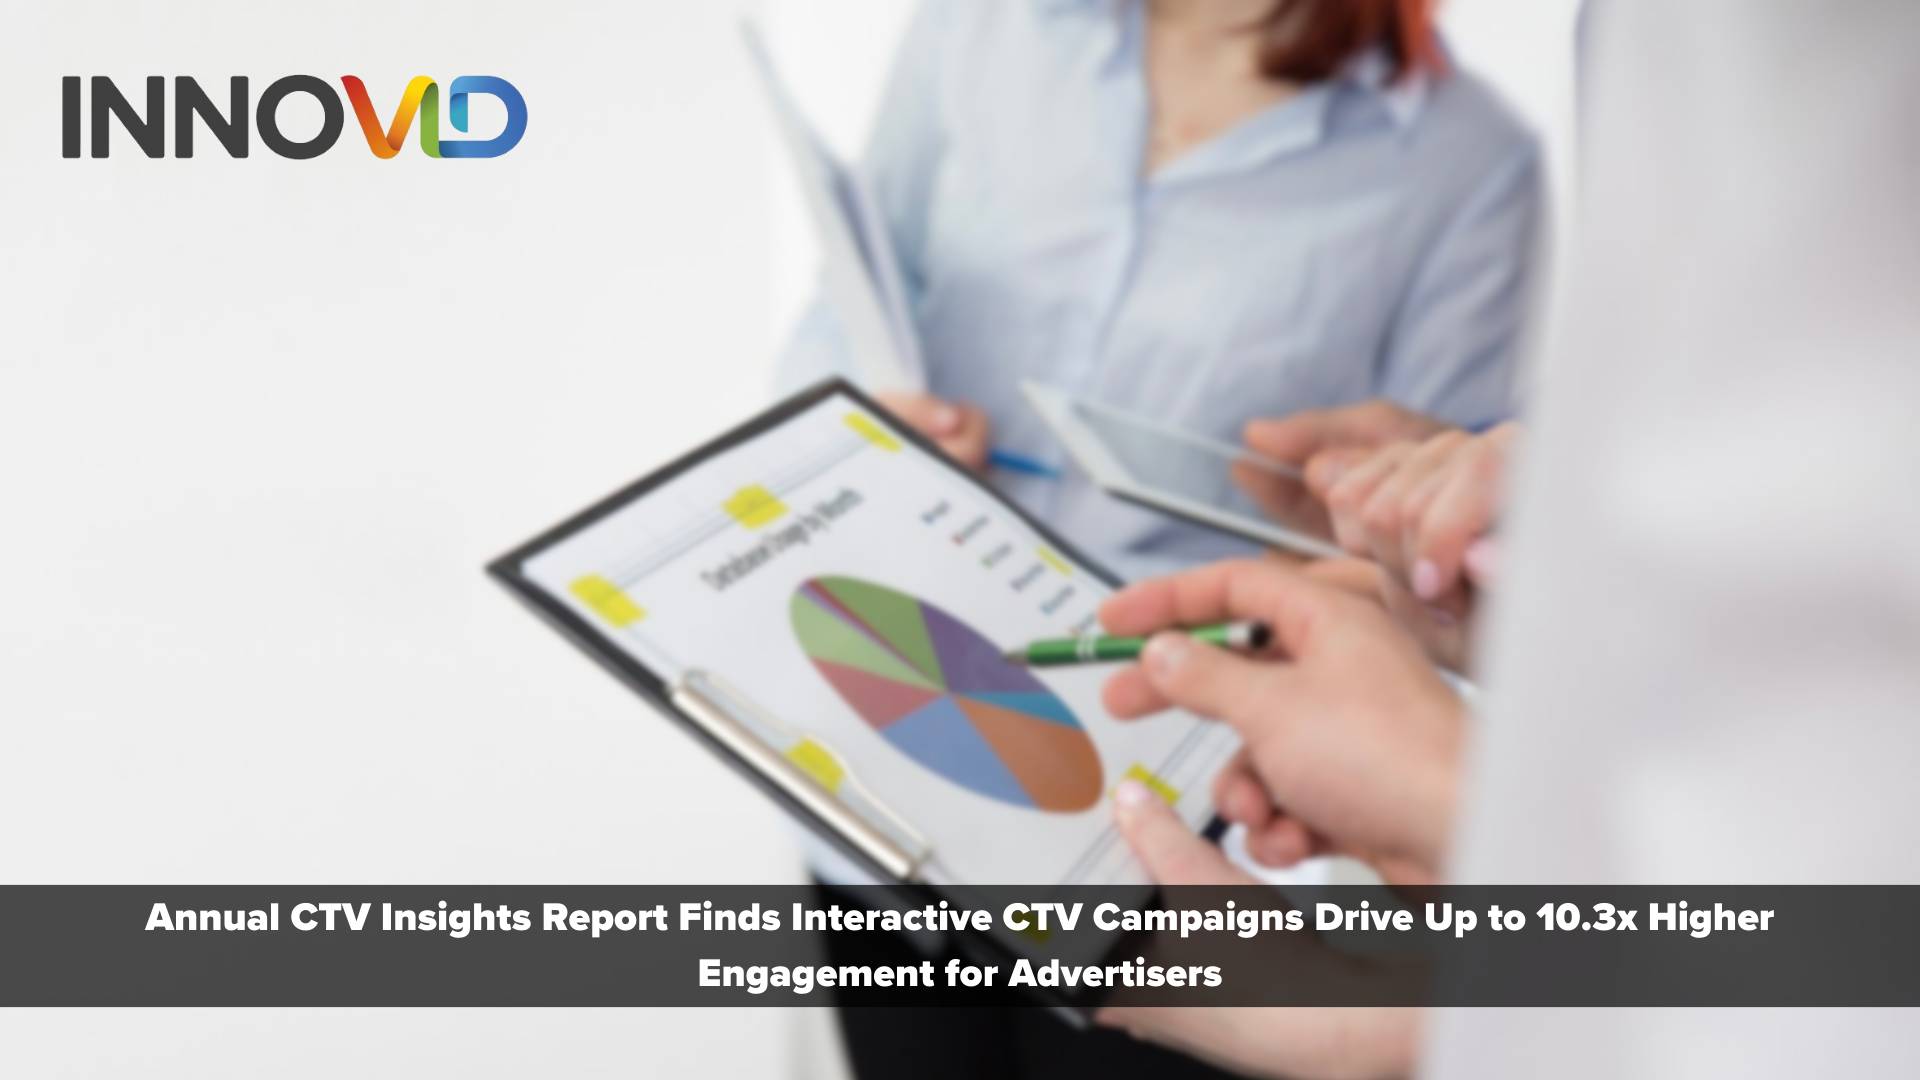 Innovid’s Annual CTV Insights Report Finds Interactive CTV Campaigns Drive Up to 10.3x Higher Engagement for Advertisers